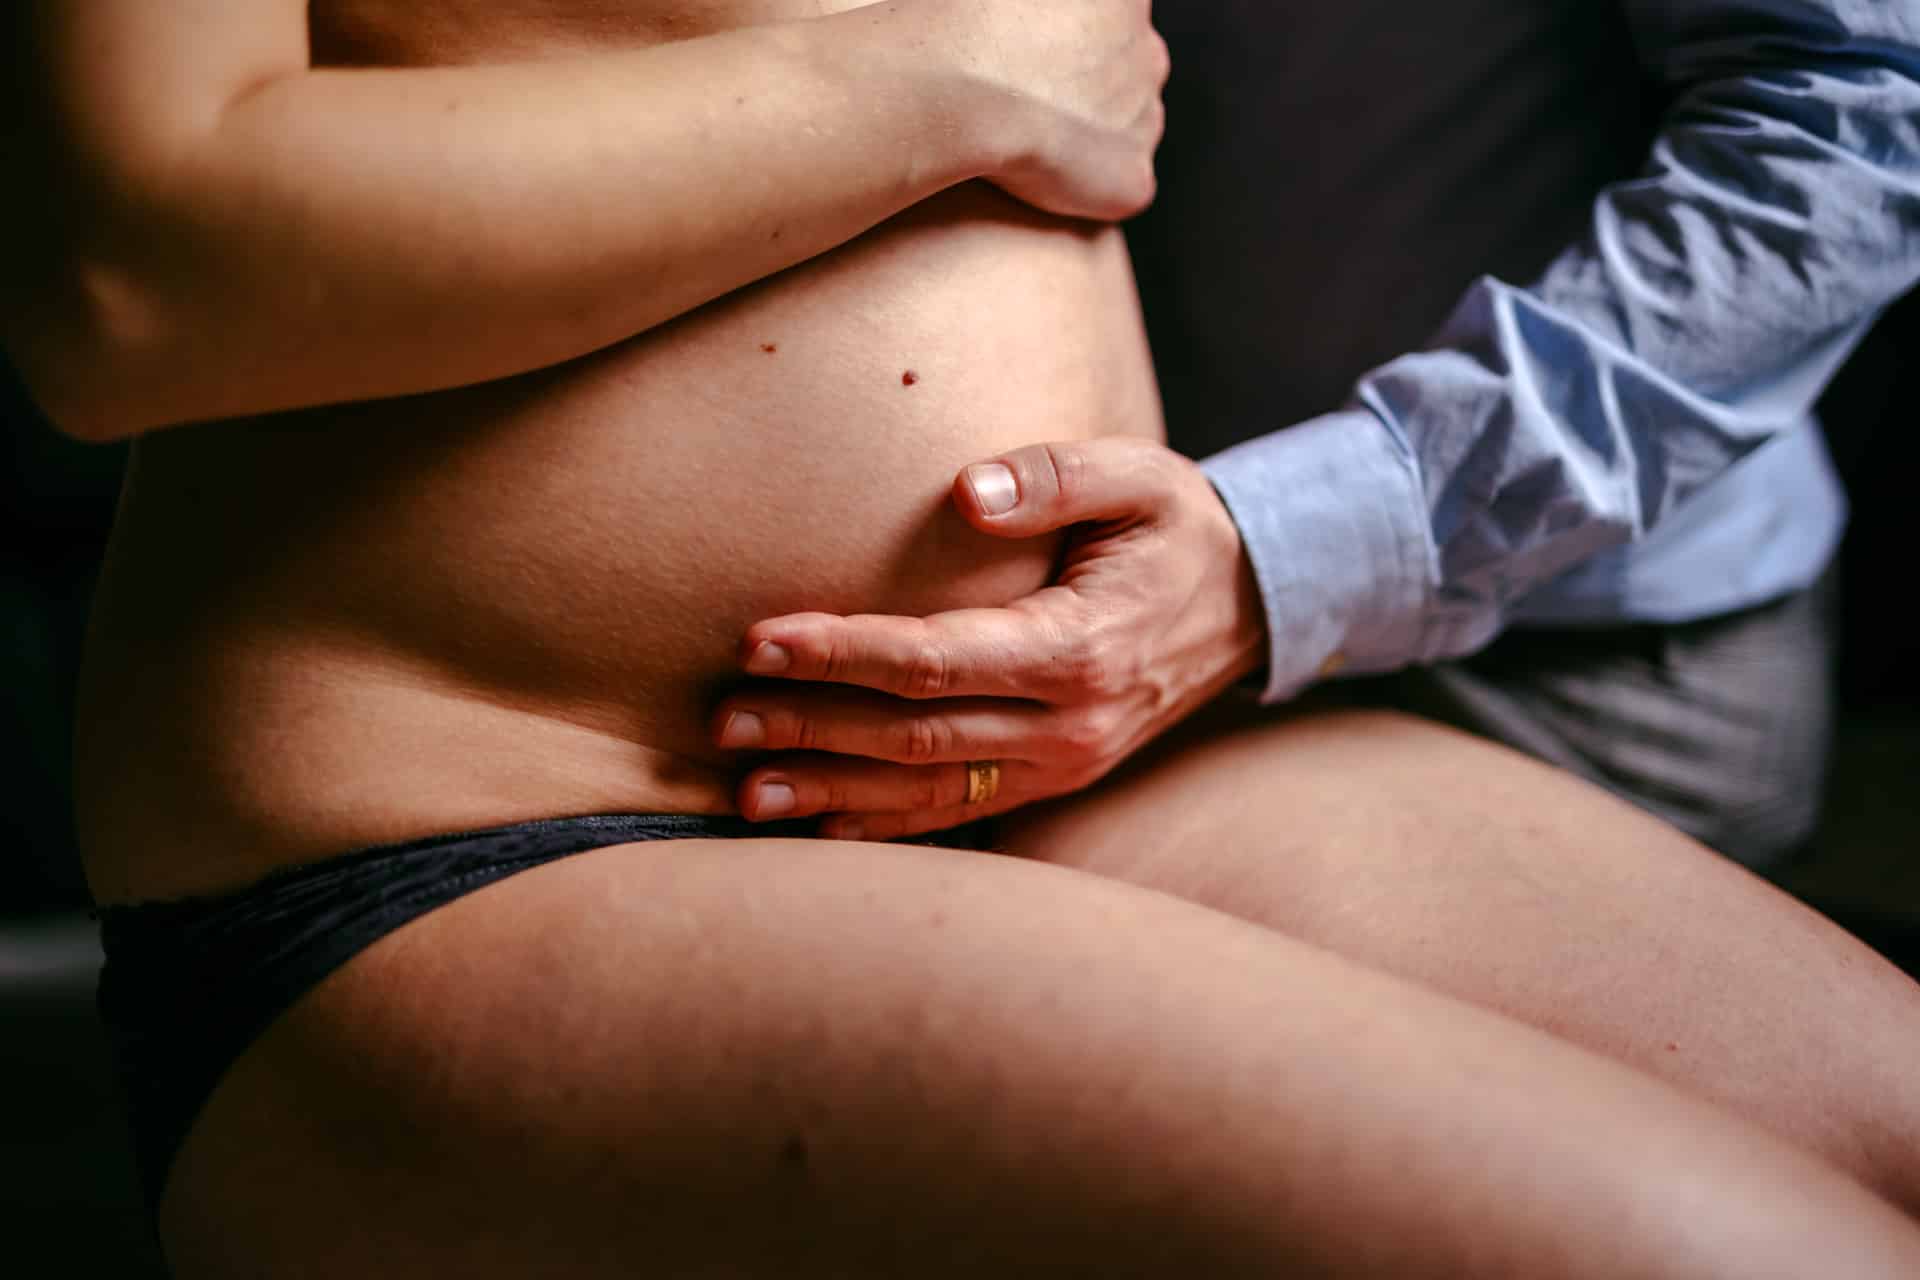 During a Pregnancy Shoot, a man gently touches the pregnant woman's belly.